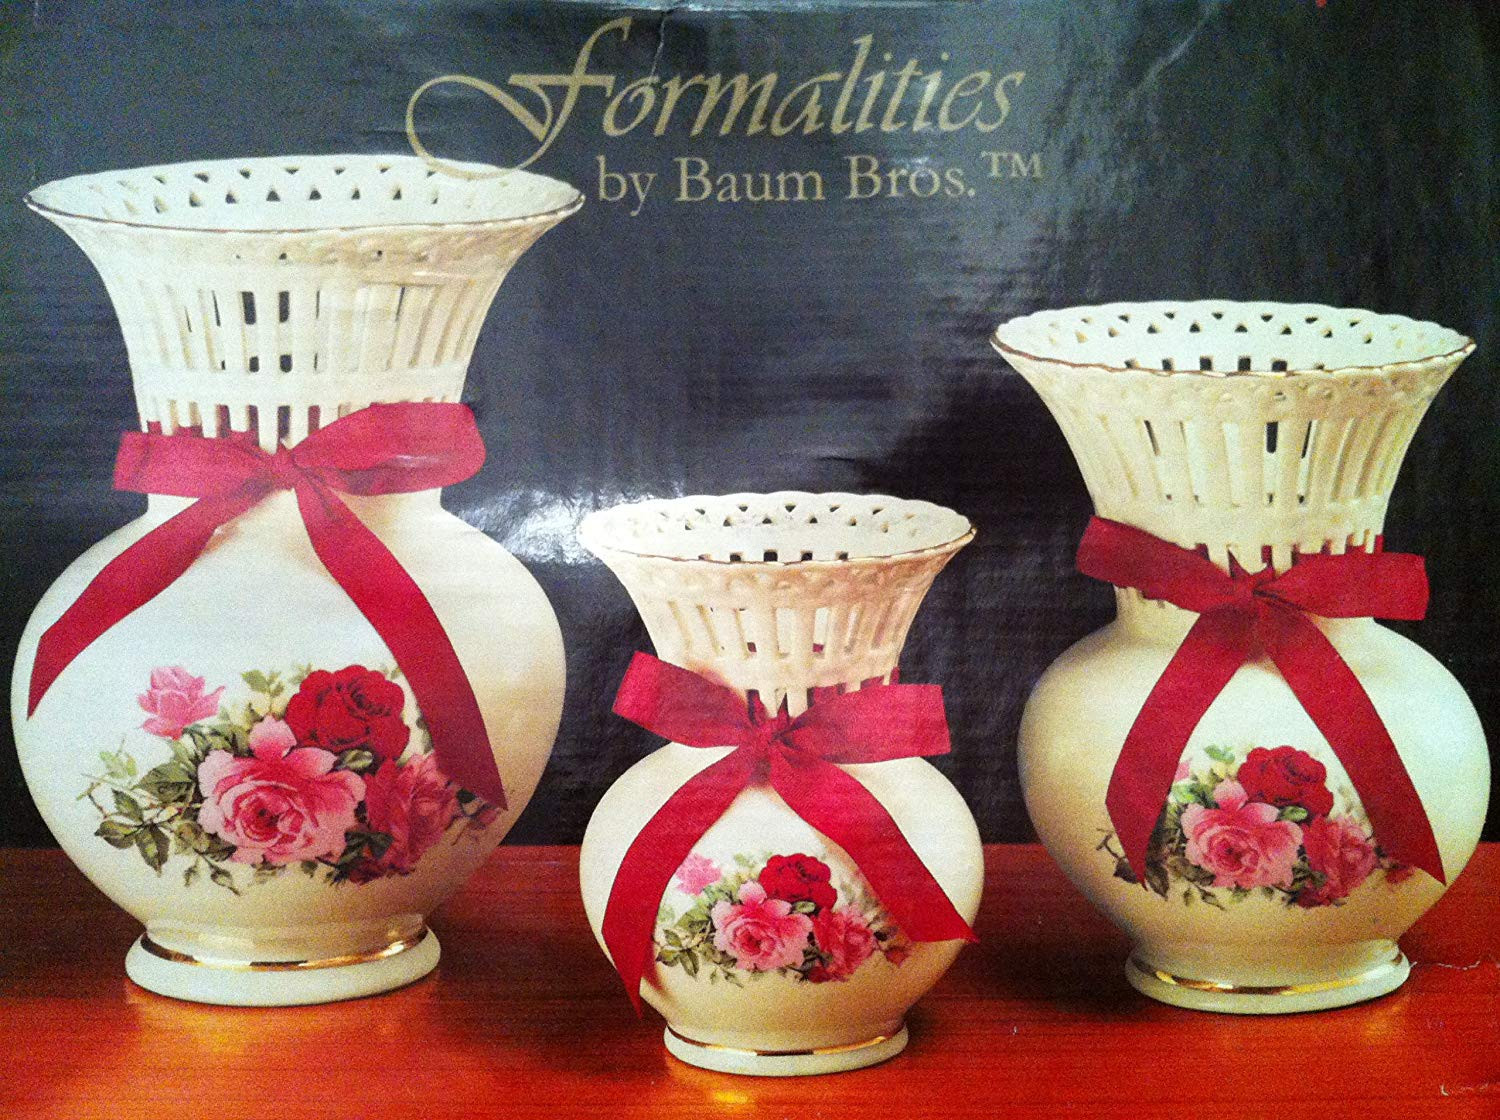 21 Unique Waterford Lismore Candy Bud Vase 2024 free download waterford lismore candy bud vase of amazon com formalities by baum bros latticework vases victorian with amazon com formalities by baum bros latticework vases victorian rose collection set o